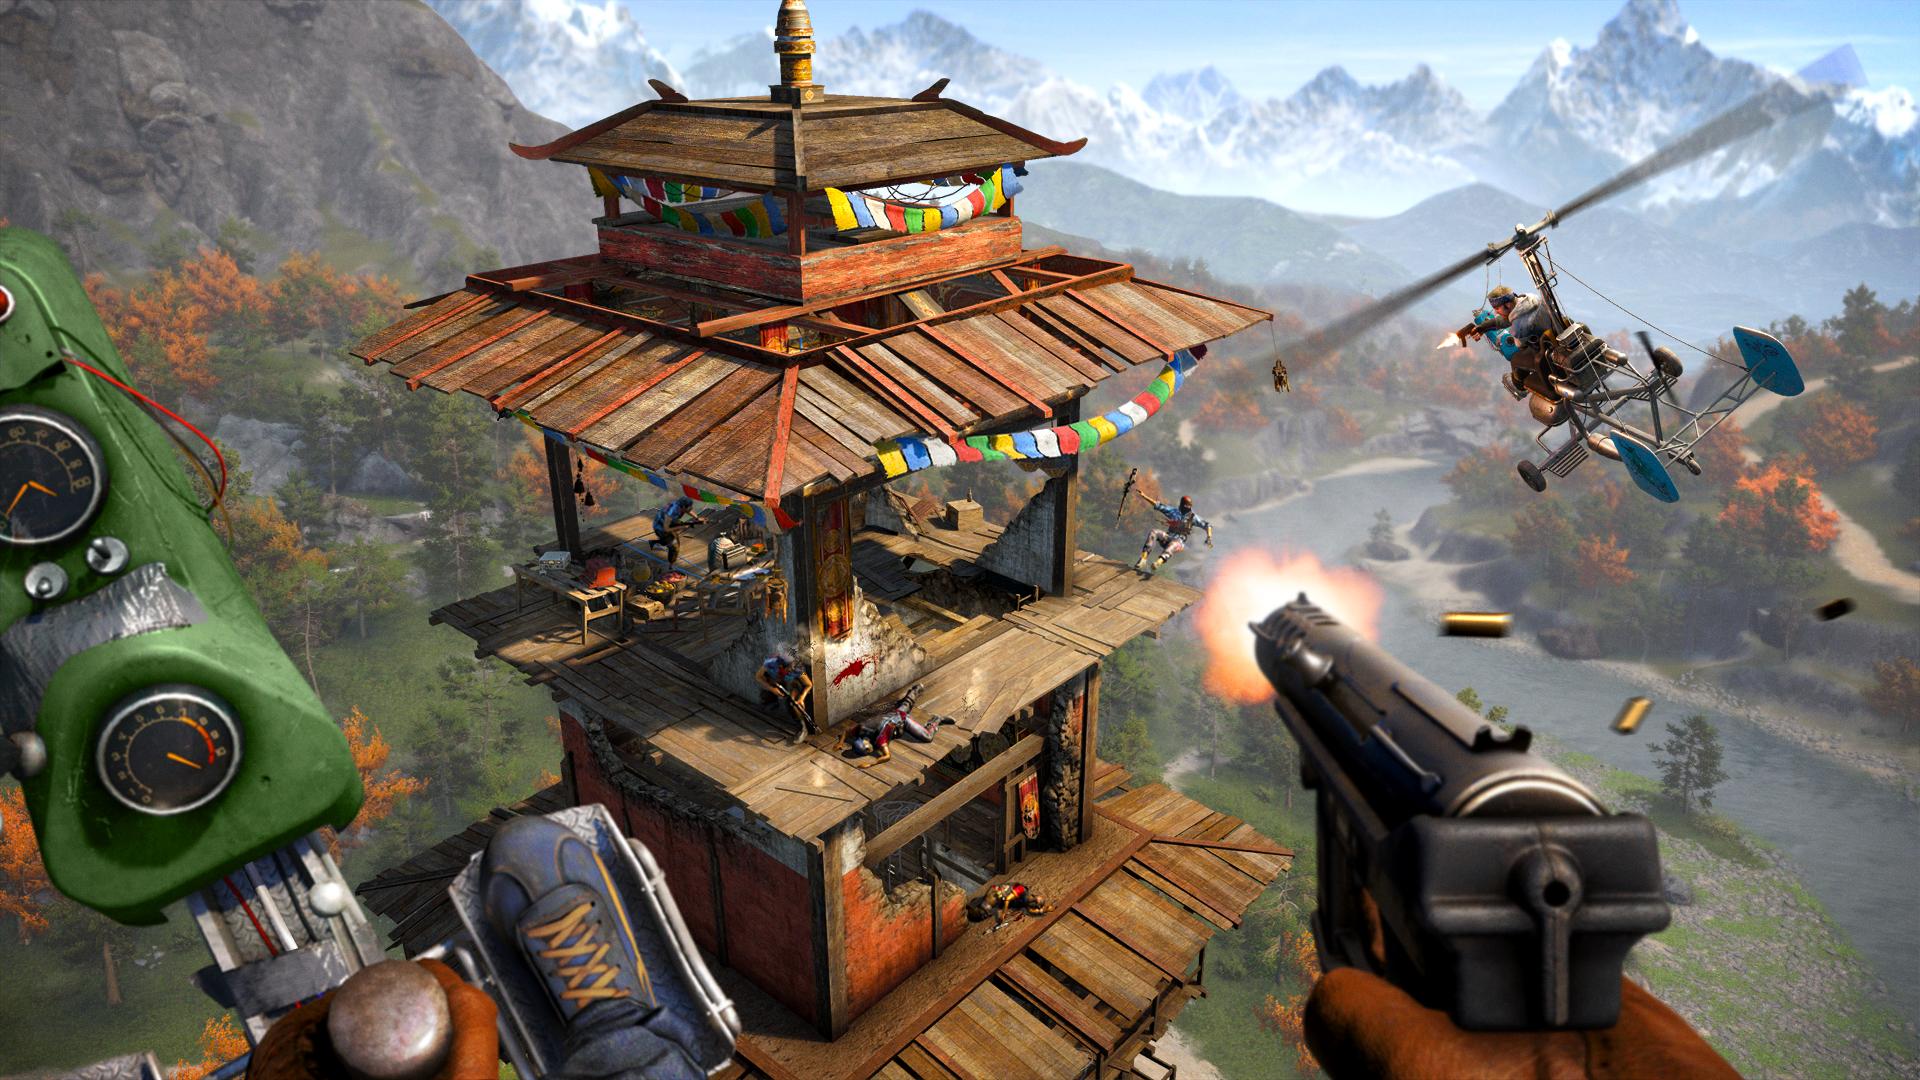 What you need to know about the Far Cry 4 release date.